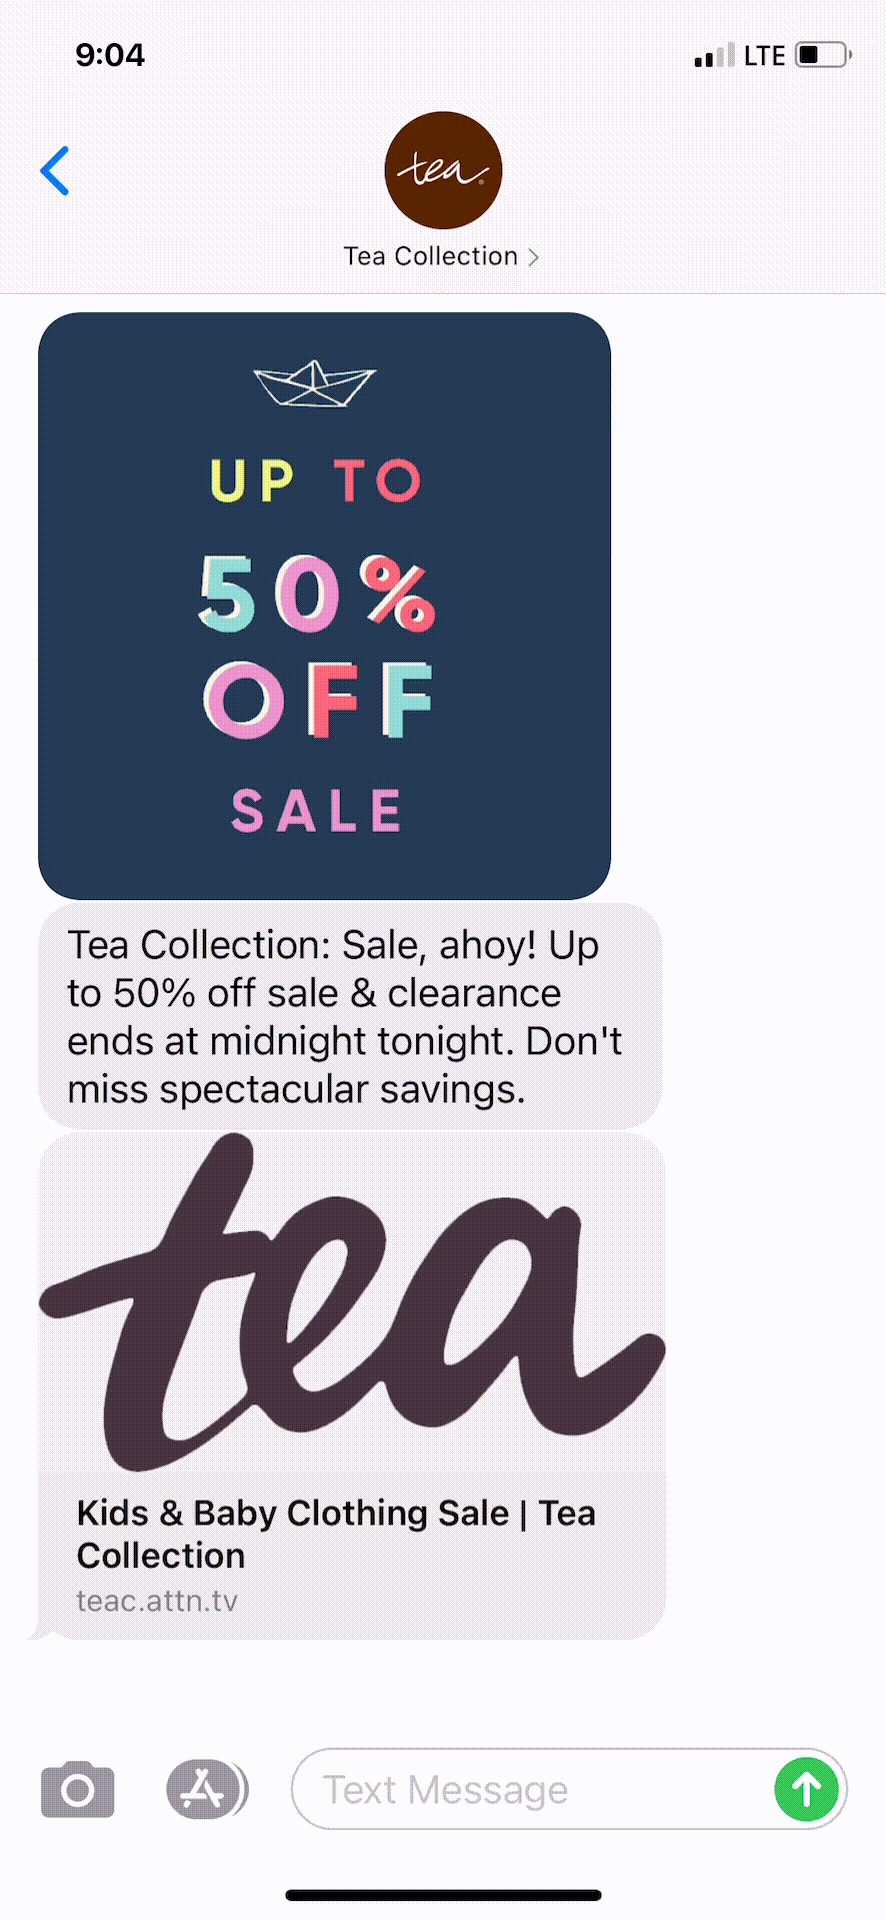 Tea-Collection-Text-Message-Marketing-Example-05.21.2021